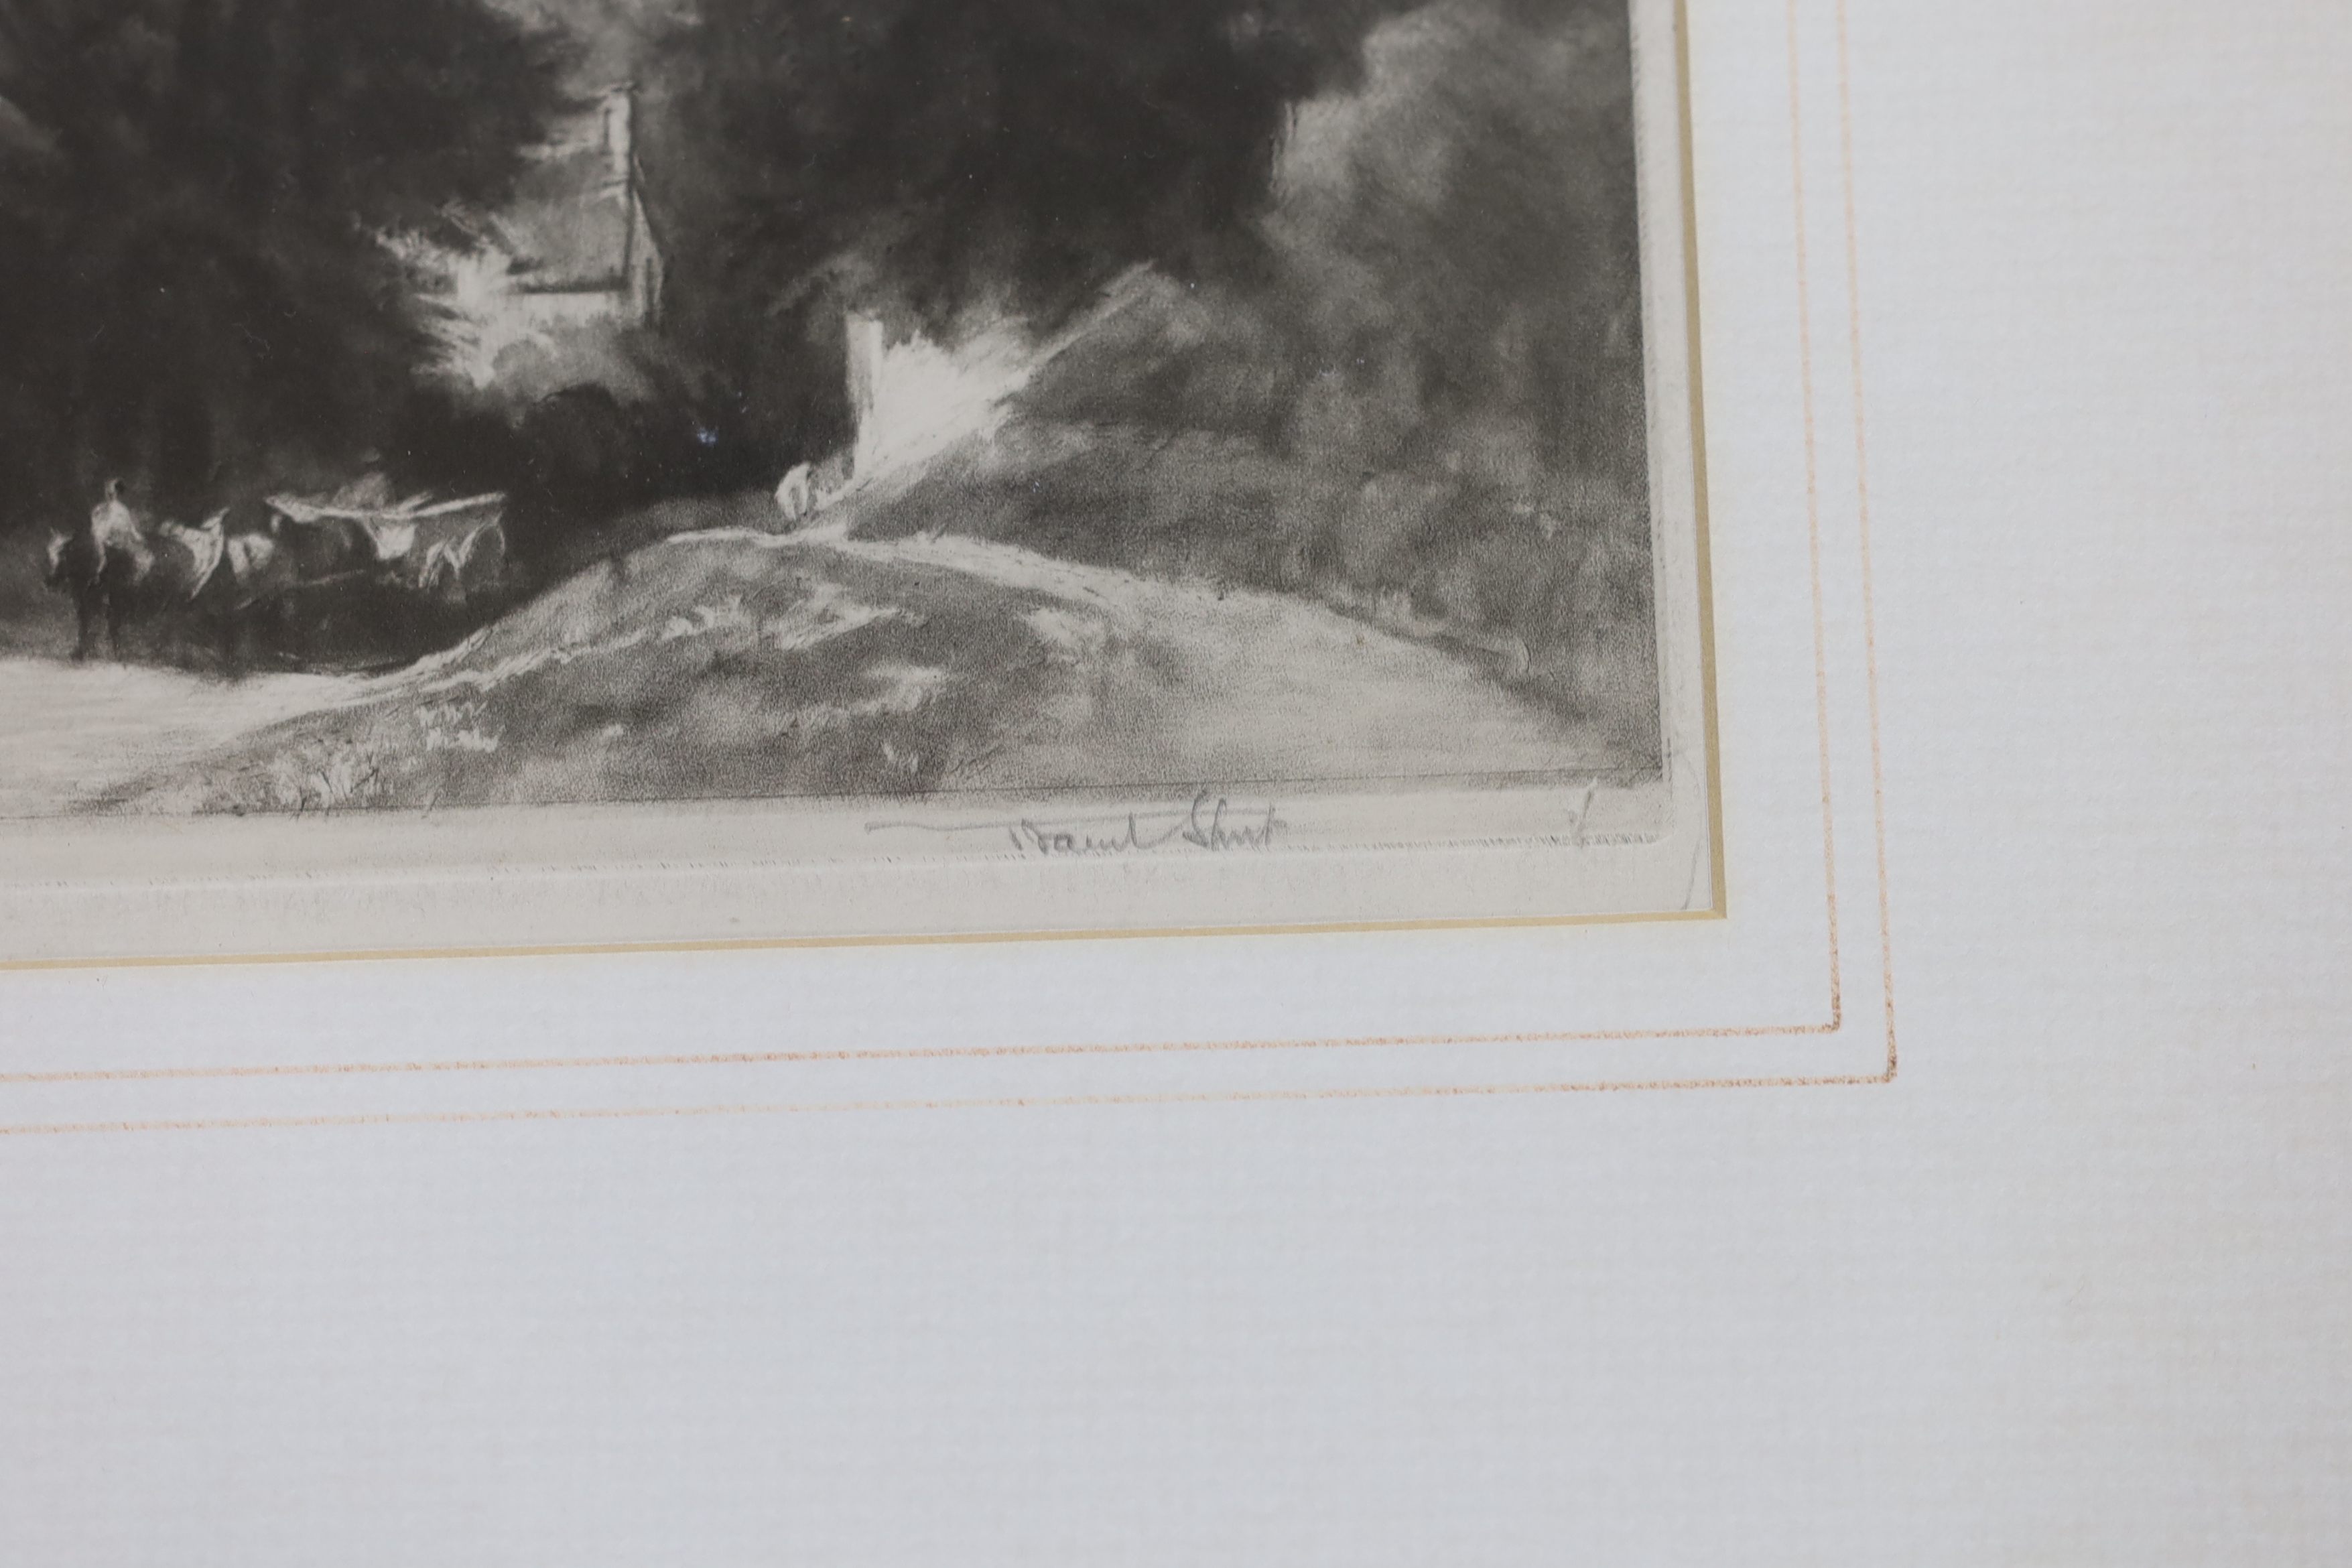 Sir Frank Short RA (1857-1945), etching, Horse and cart on a pathway, signed in pencil, print held by The British Museum, 16 x 23cm